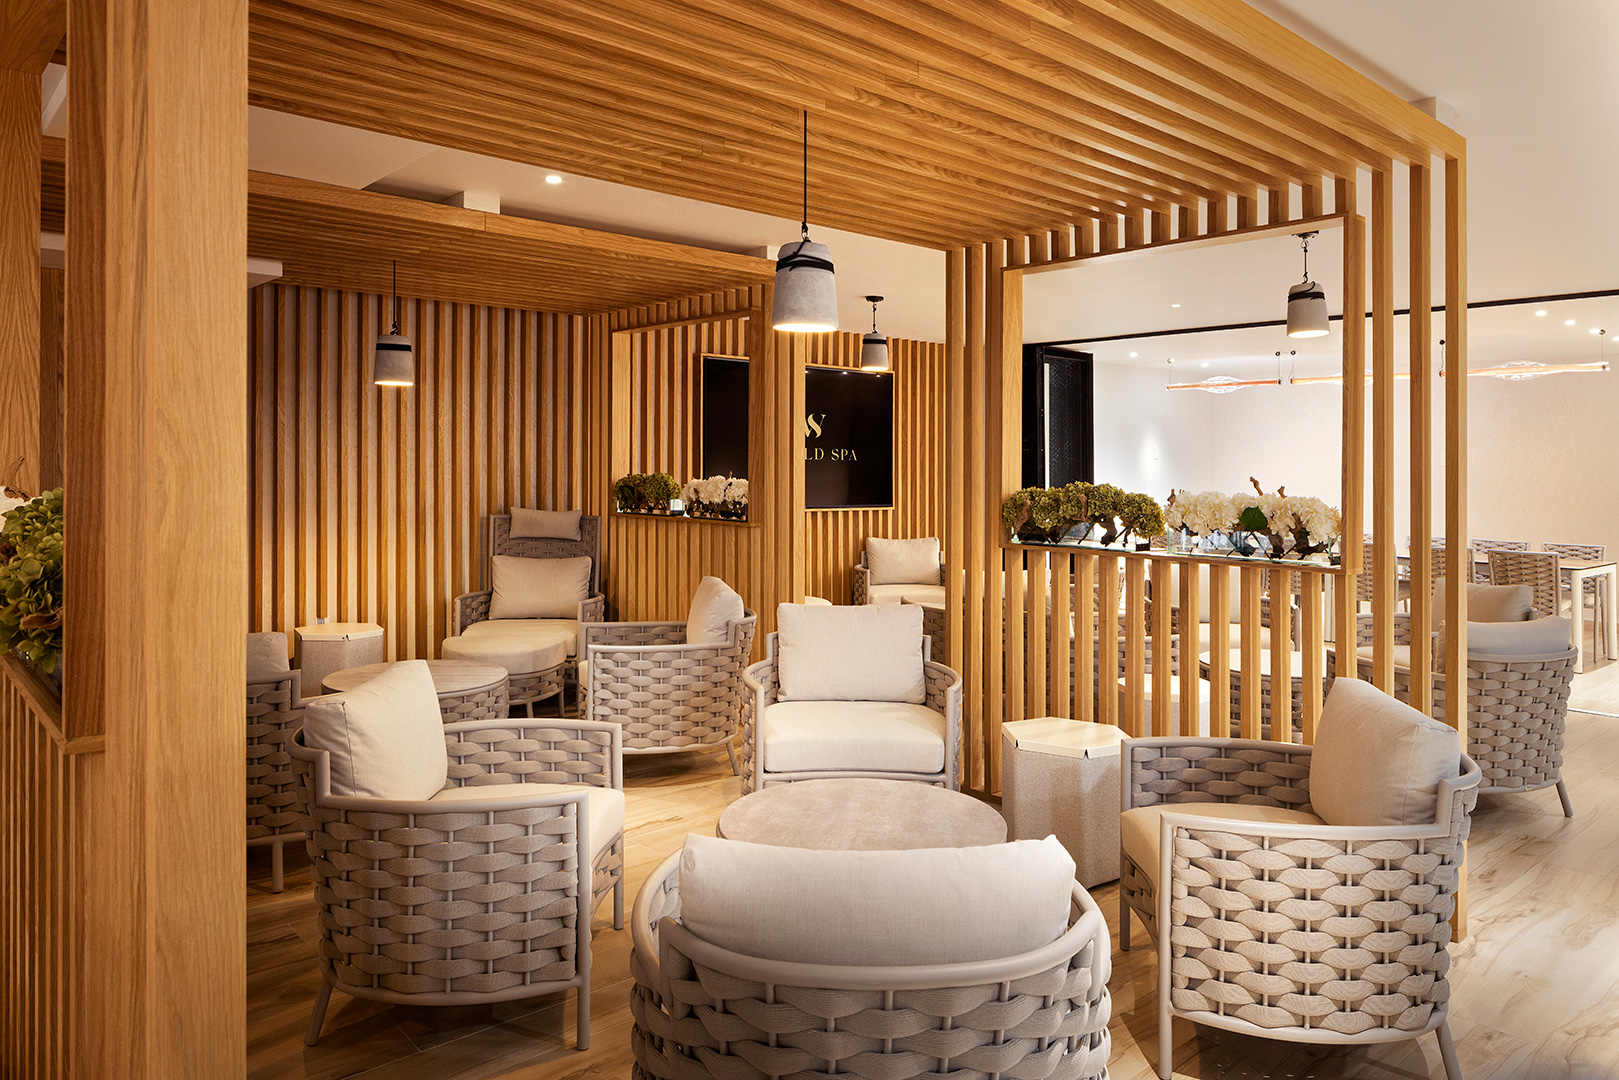 A luxurious lounge space boasting a contemporary design, with an array of woven chairs arranged for intimate conversations, complemented by soft pillows. The room features wooden slatted partitions, stylish pendant lights, and elegant floral decorations